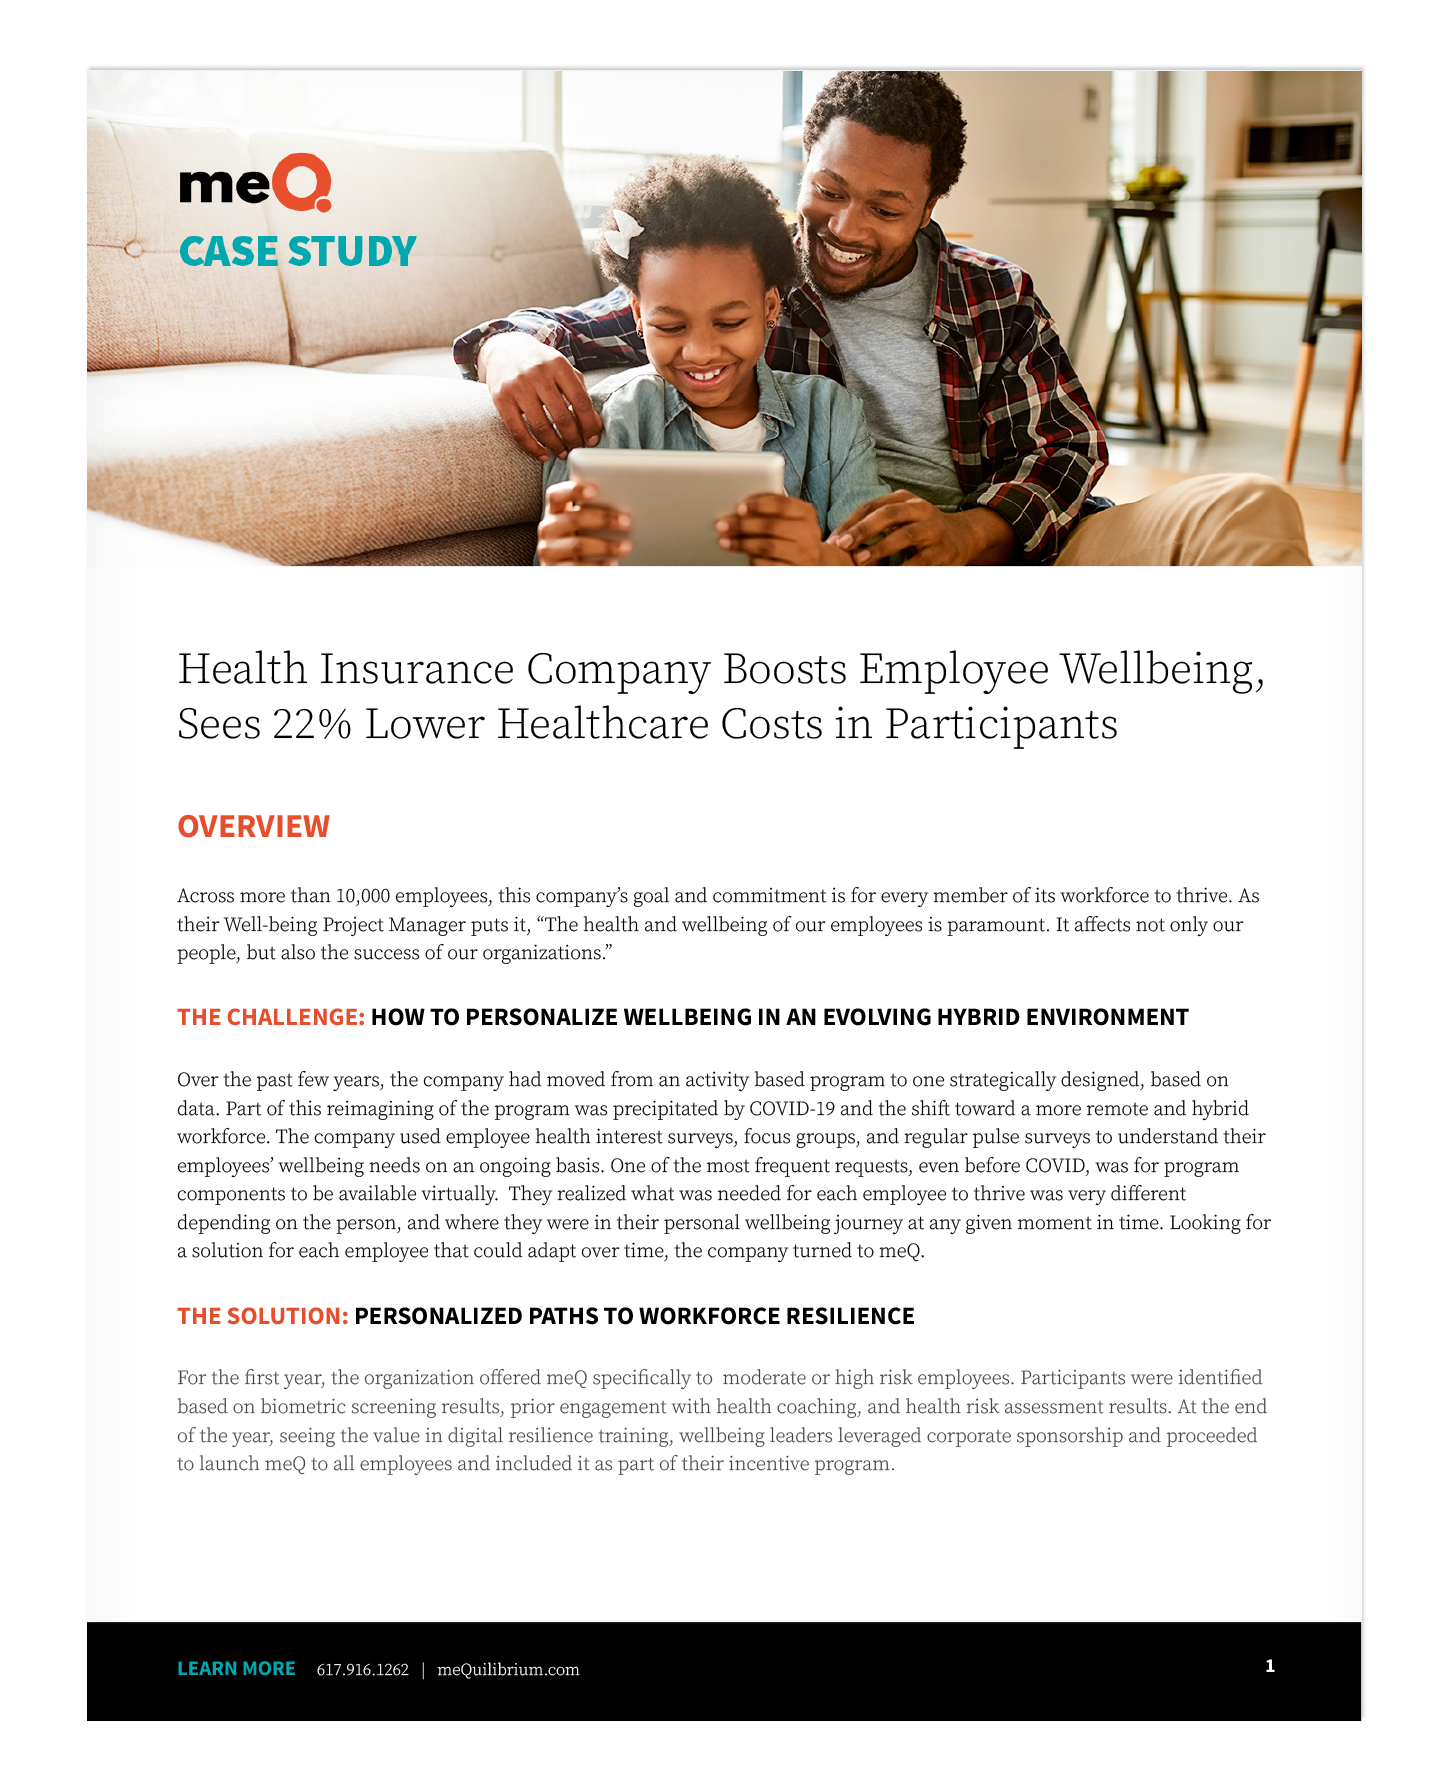 Health Insurance and Well-being